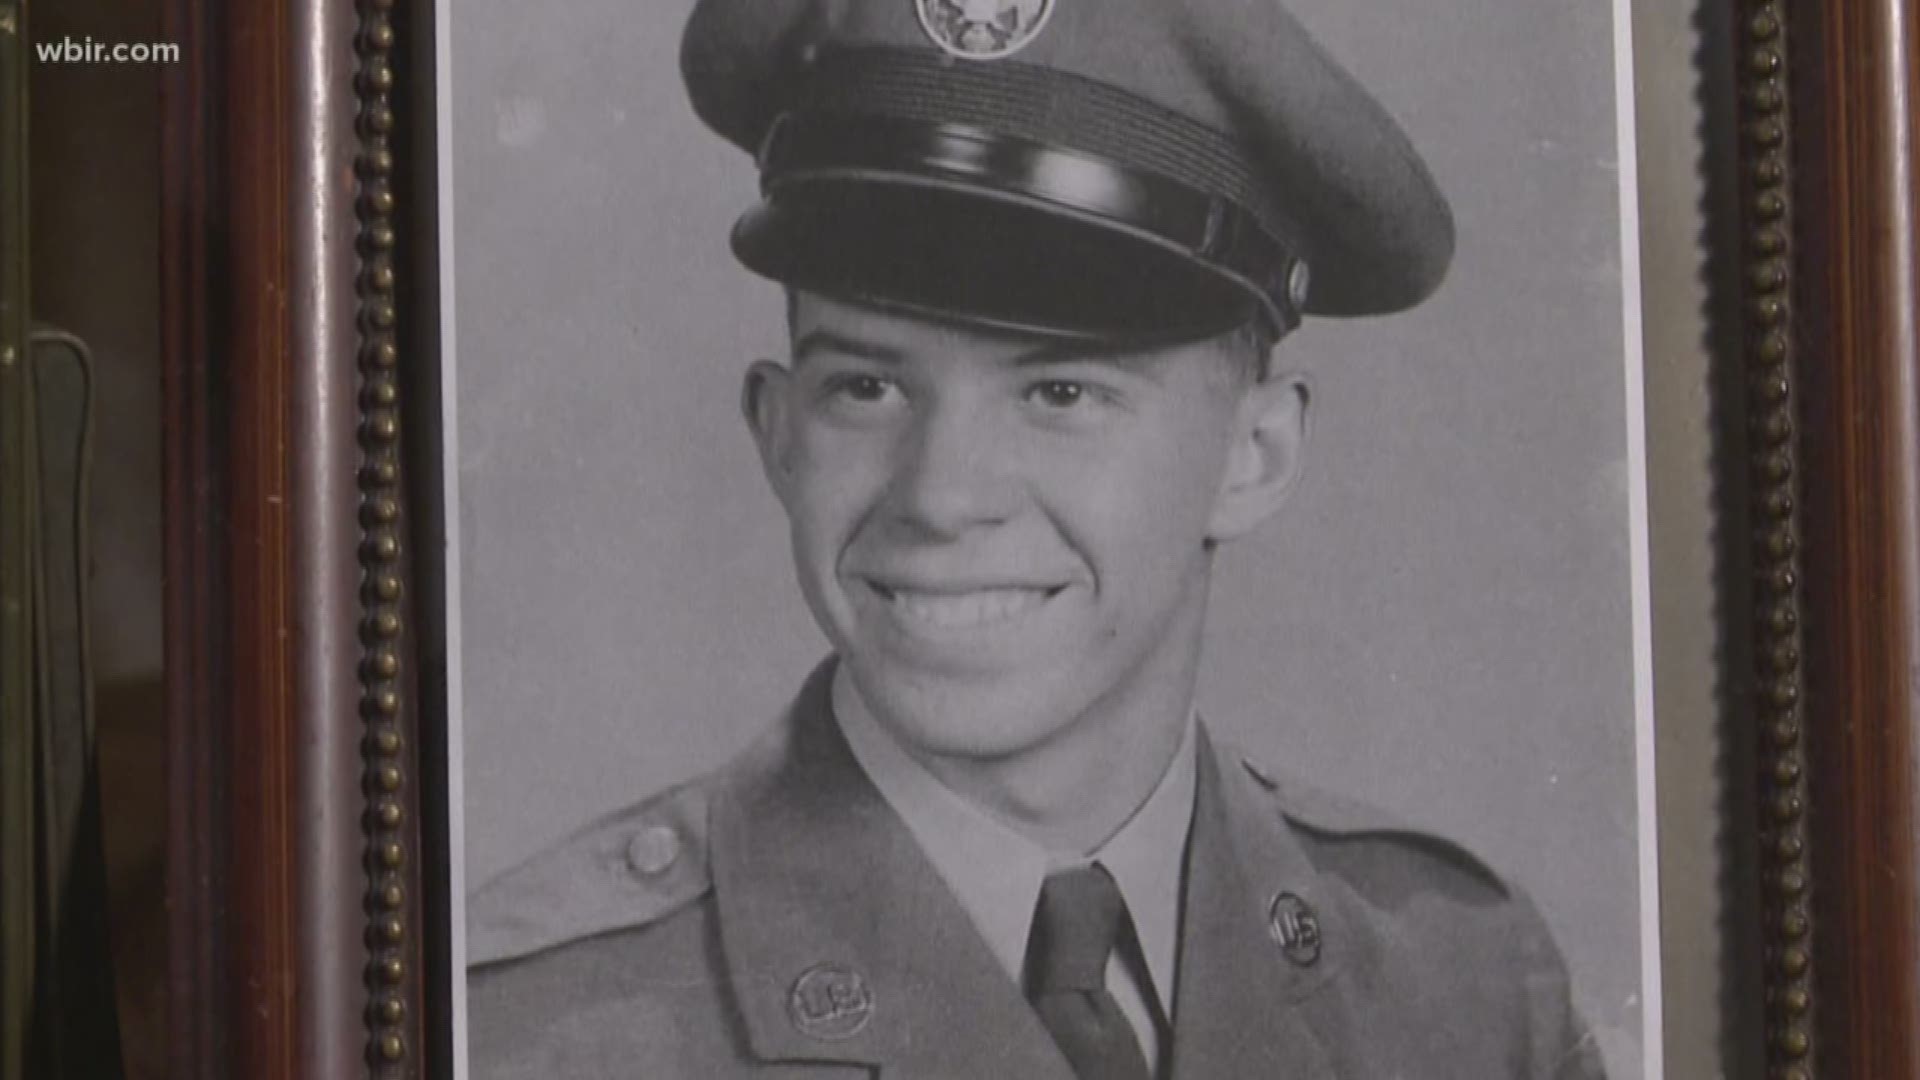 The family of a long-lost Airman from East Tennessee waited decades to lay him to rest. We first reported the story of Eddie Mize a few weeks ago...and today we bring you the final salute for that Airman.